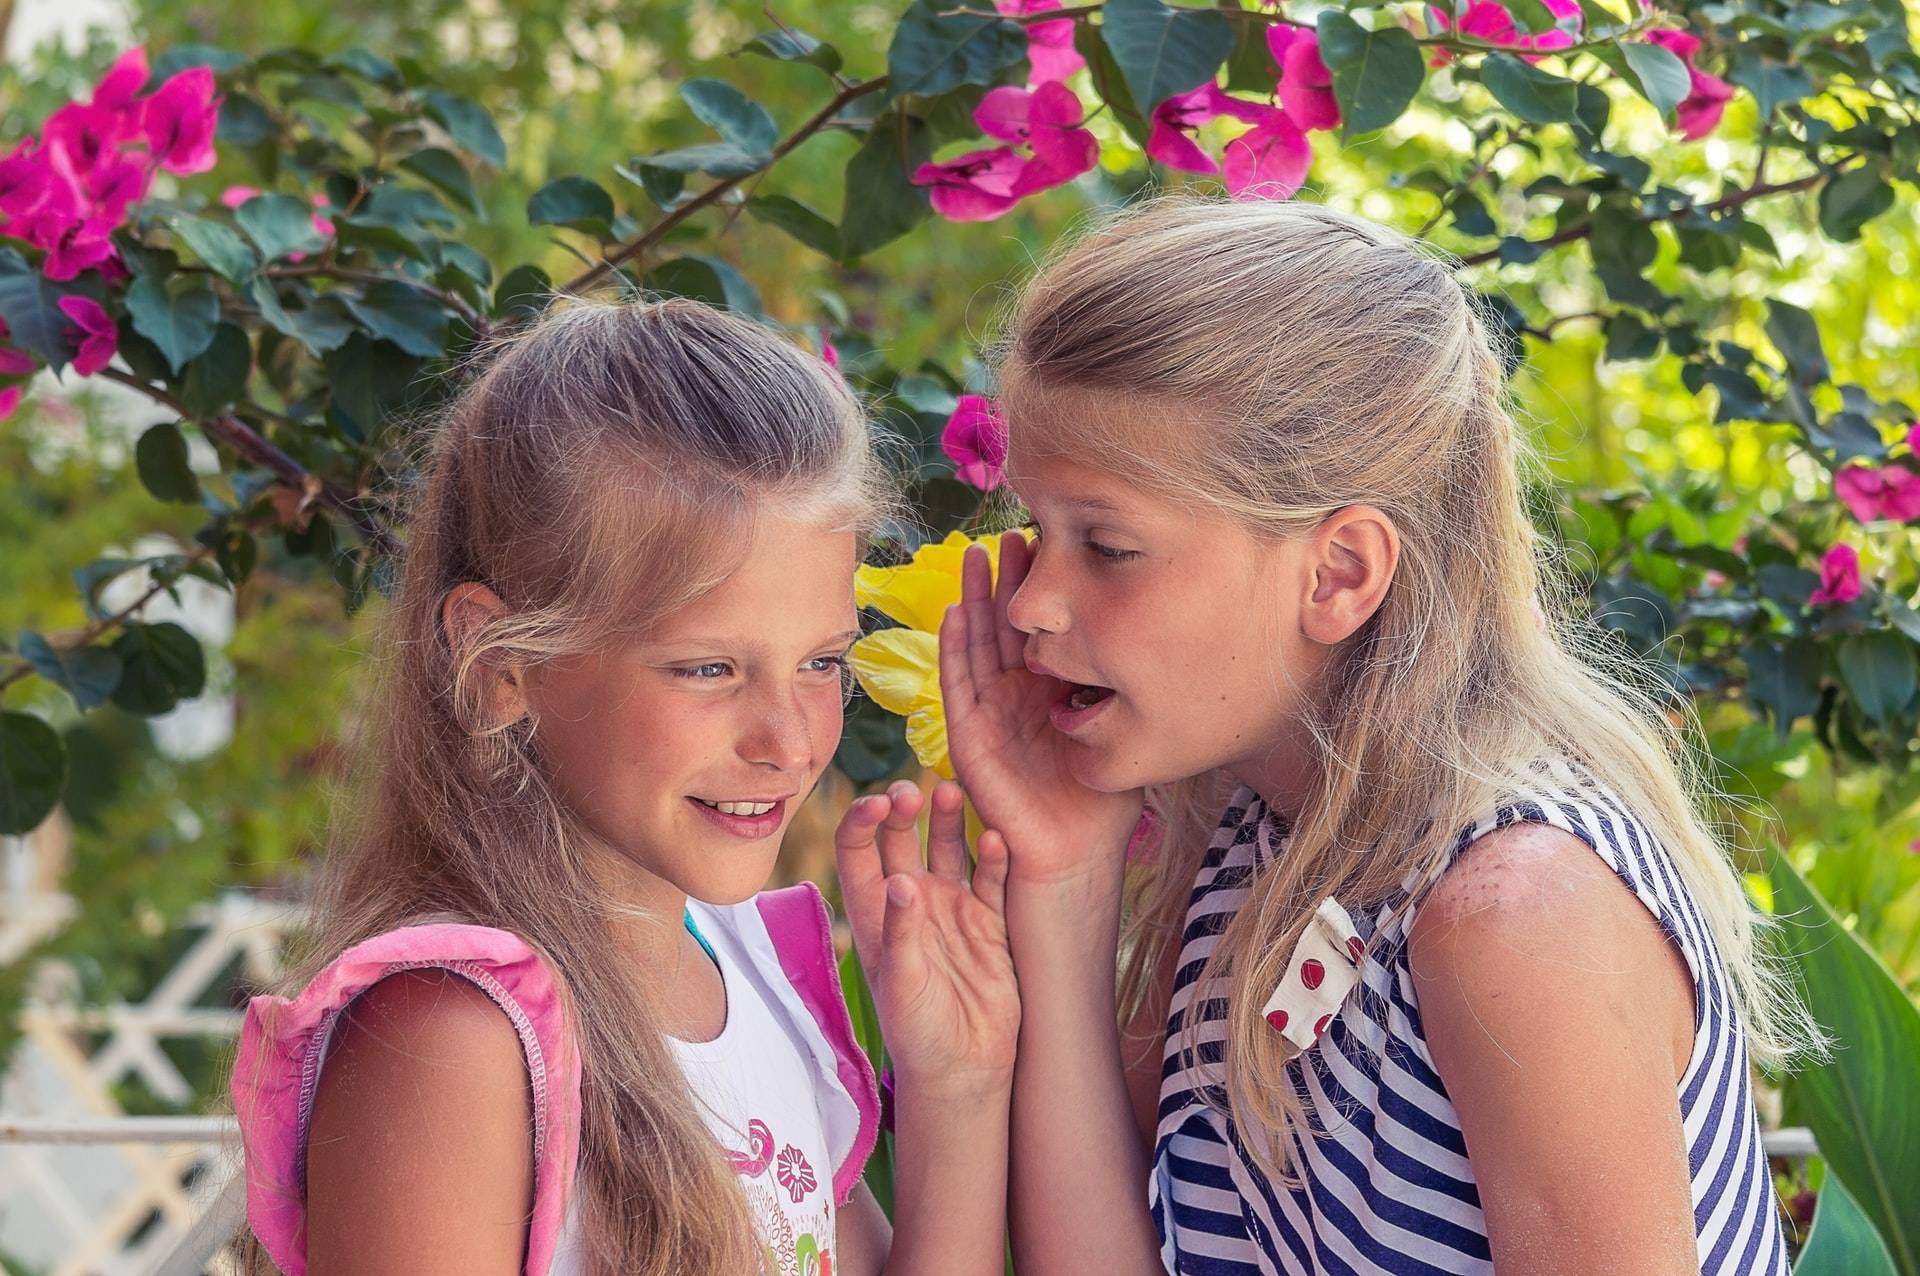 little girl whispering into another girl's ear